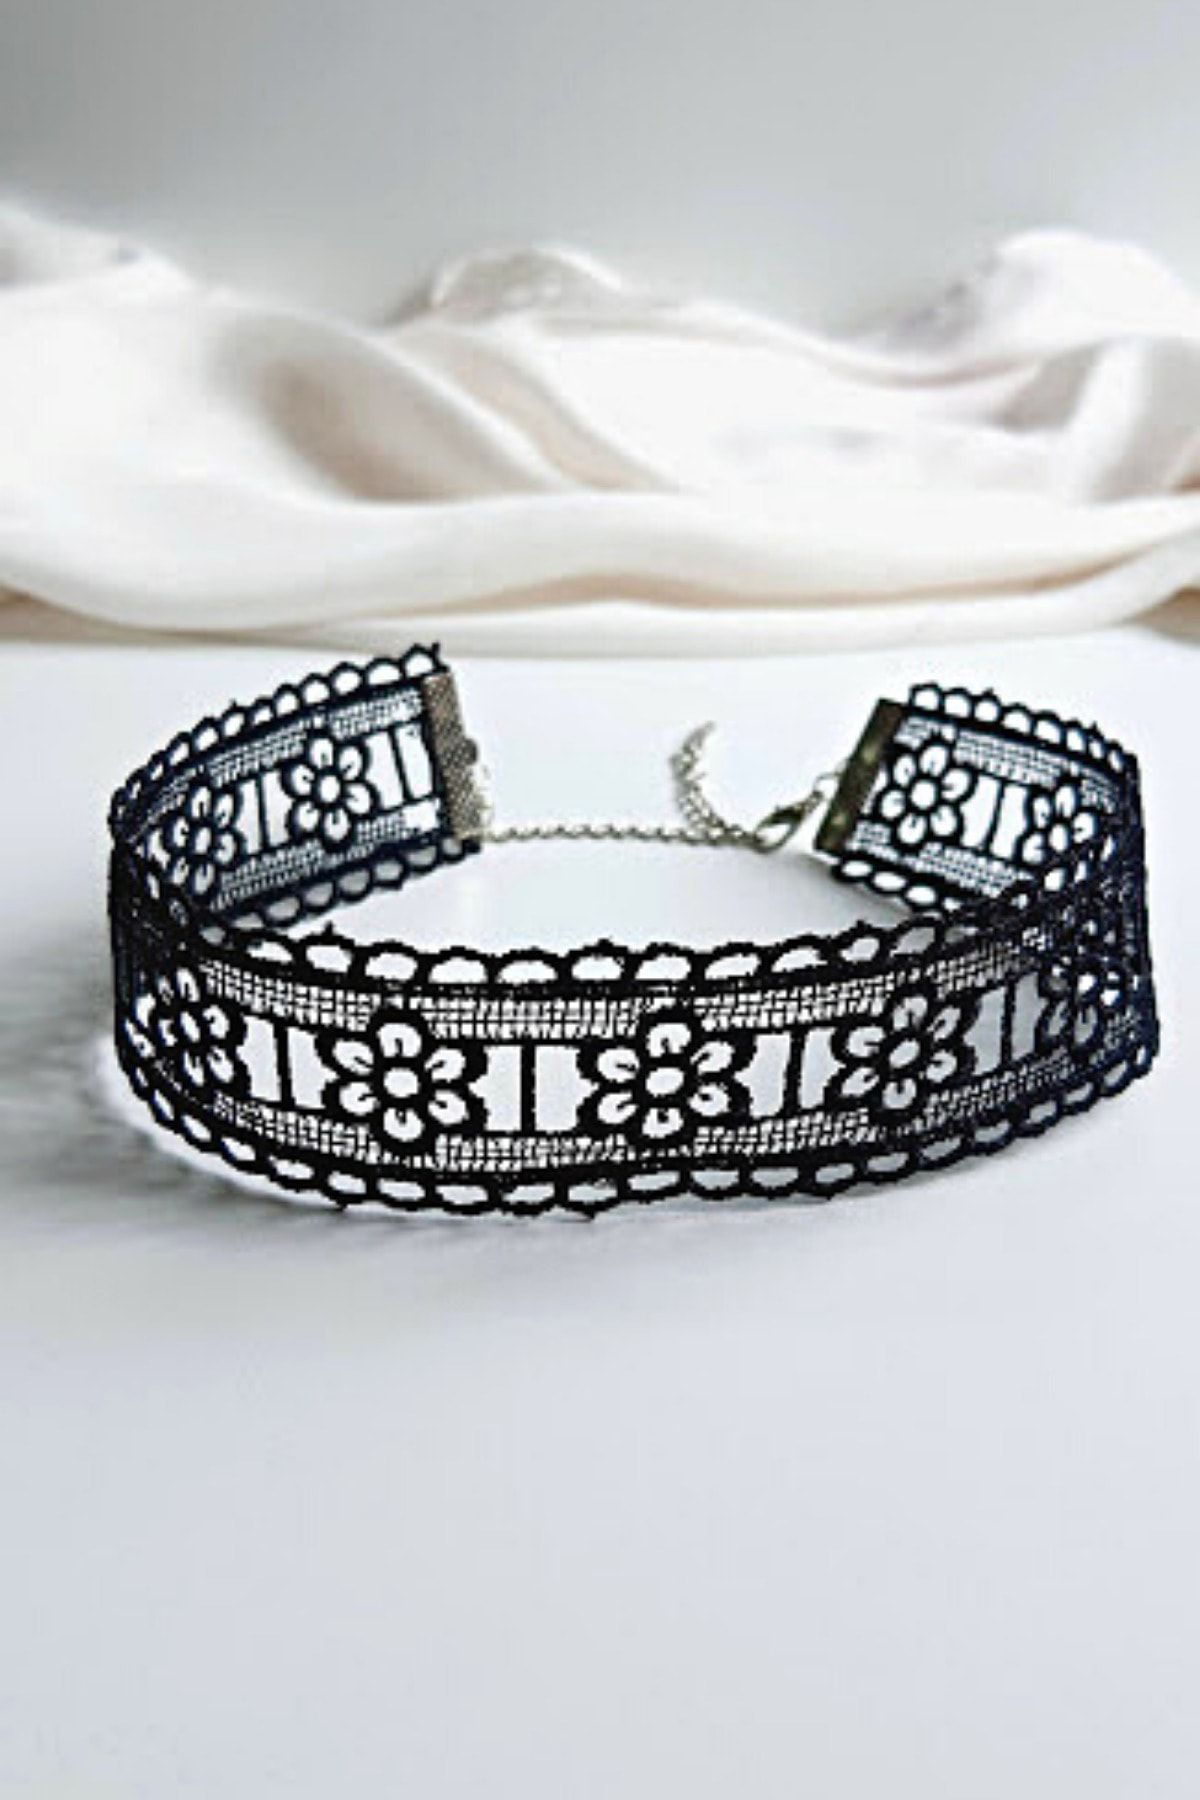 Pearl Lace Choker Necklace Gothic - Robin Lace Choker